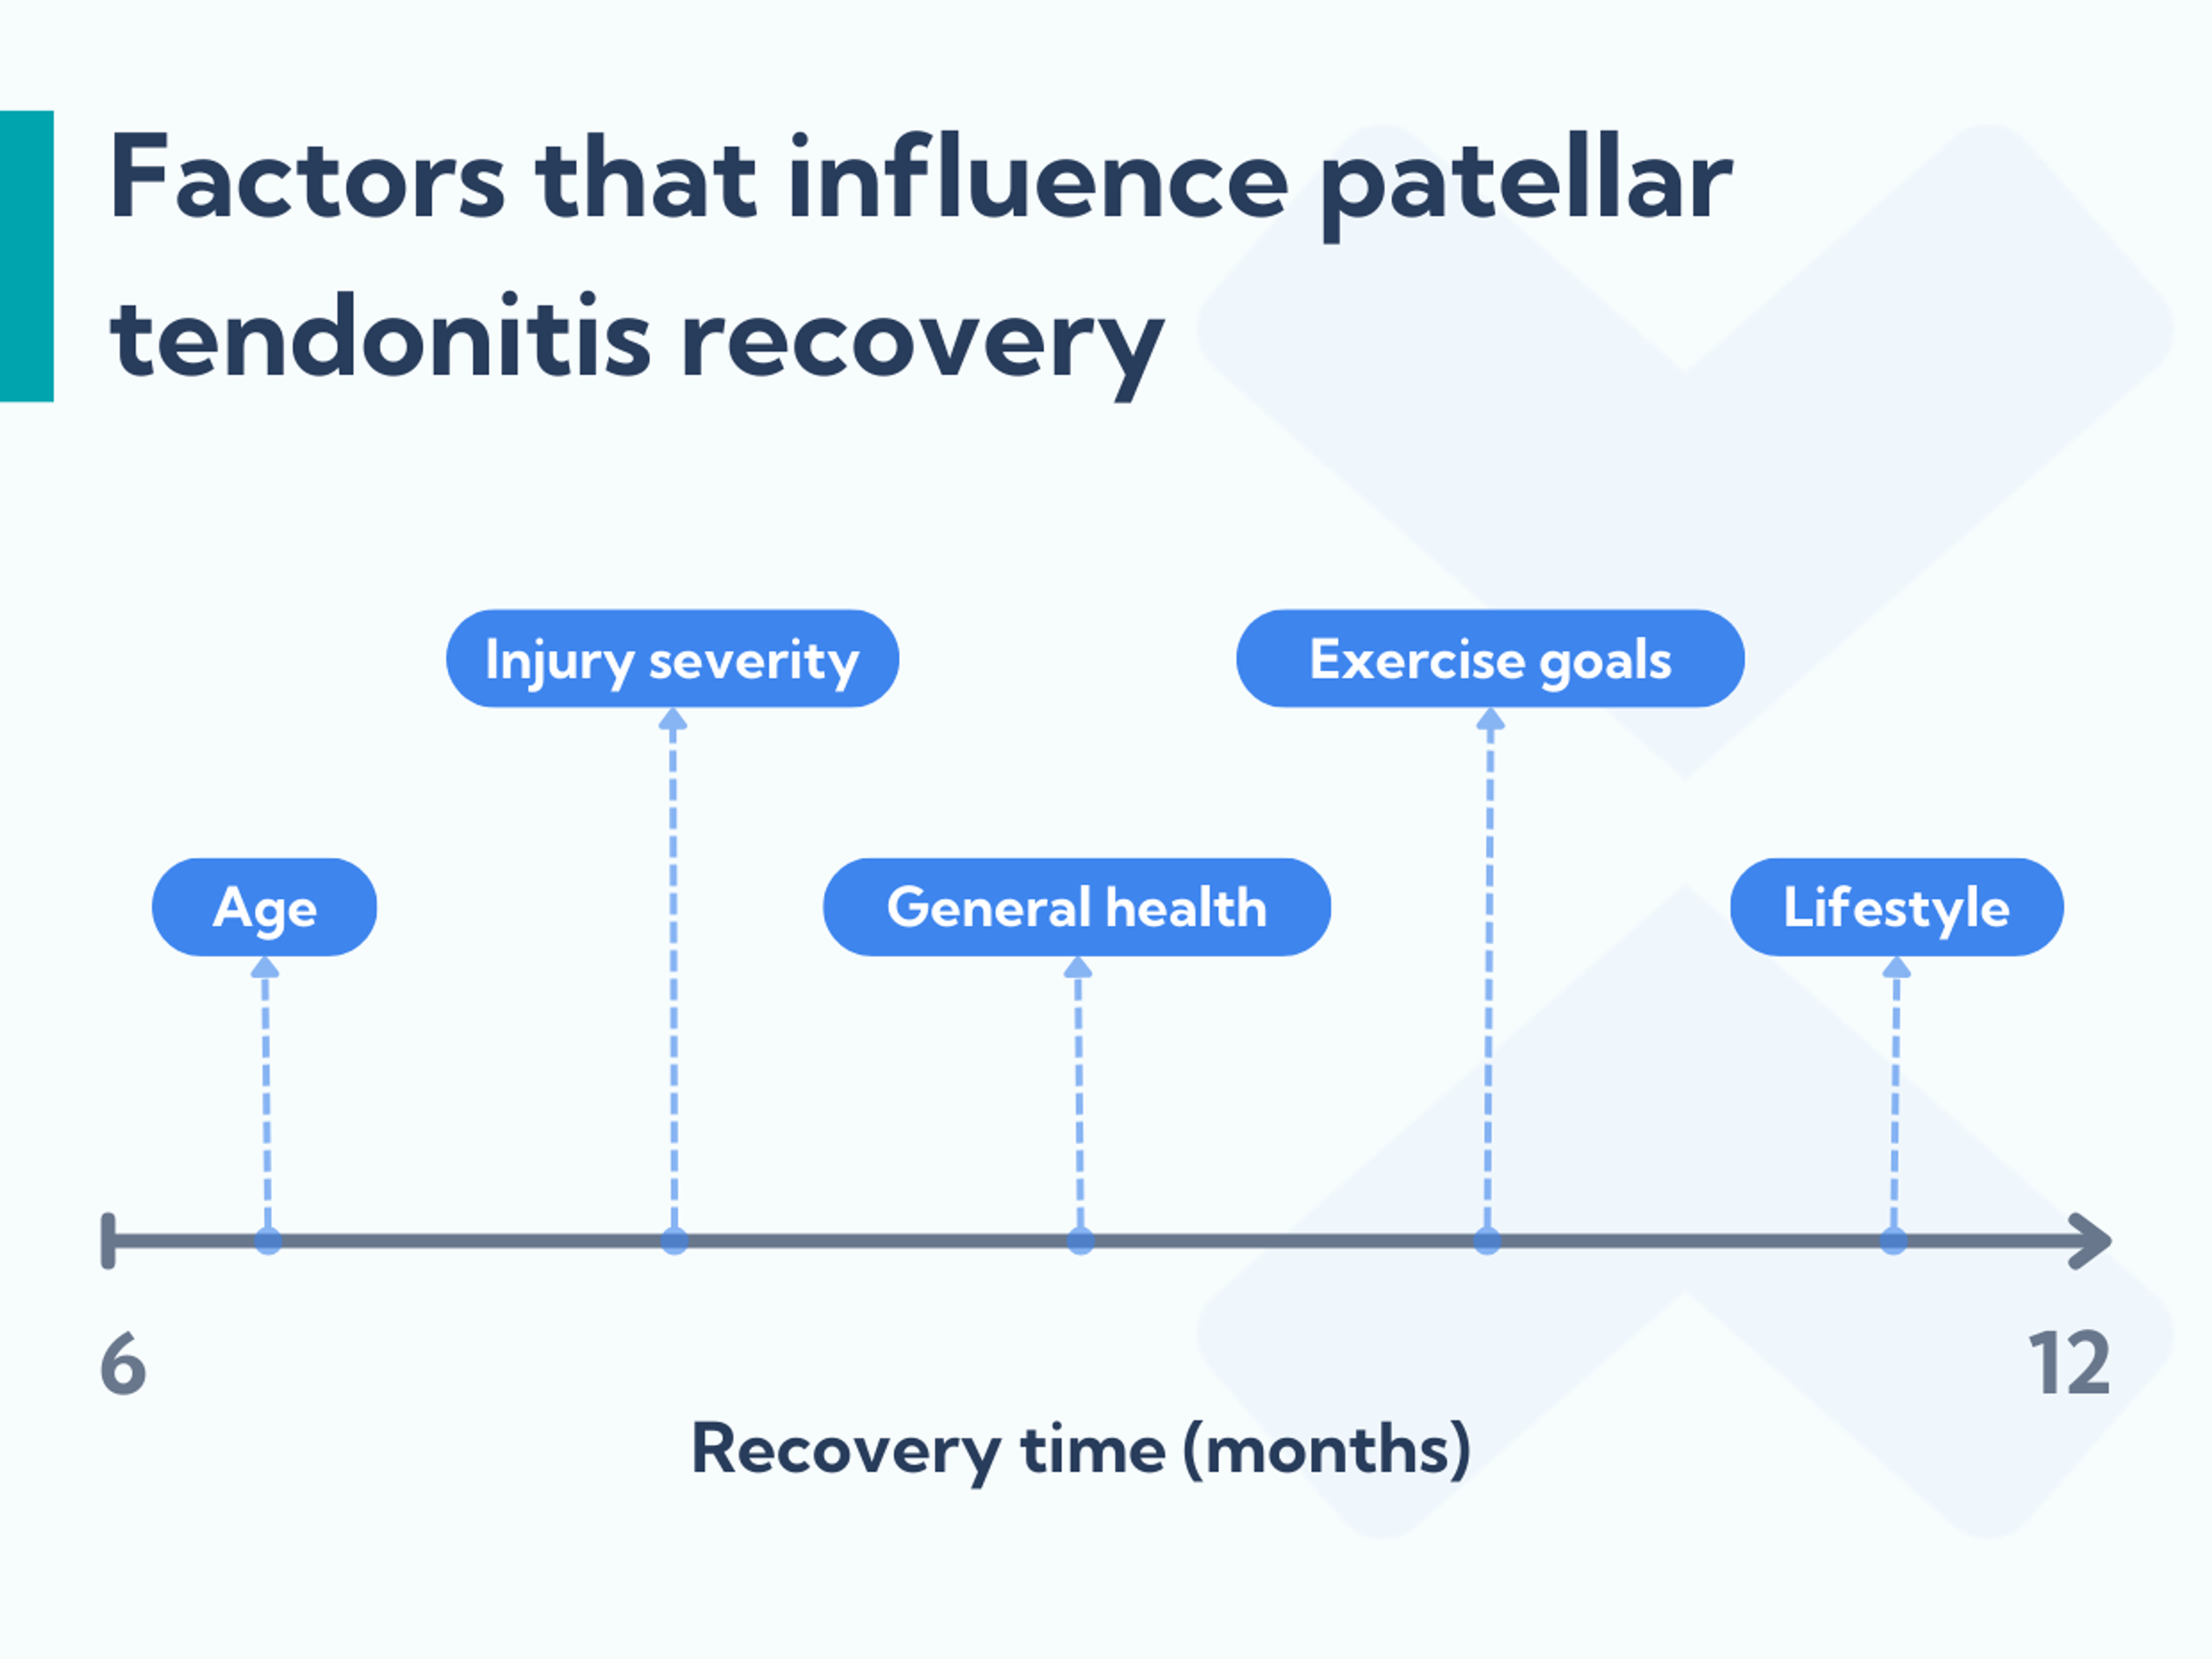 Factors that influence your patellar tendonitis recovery time.